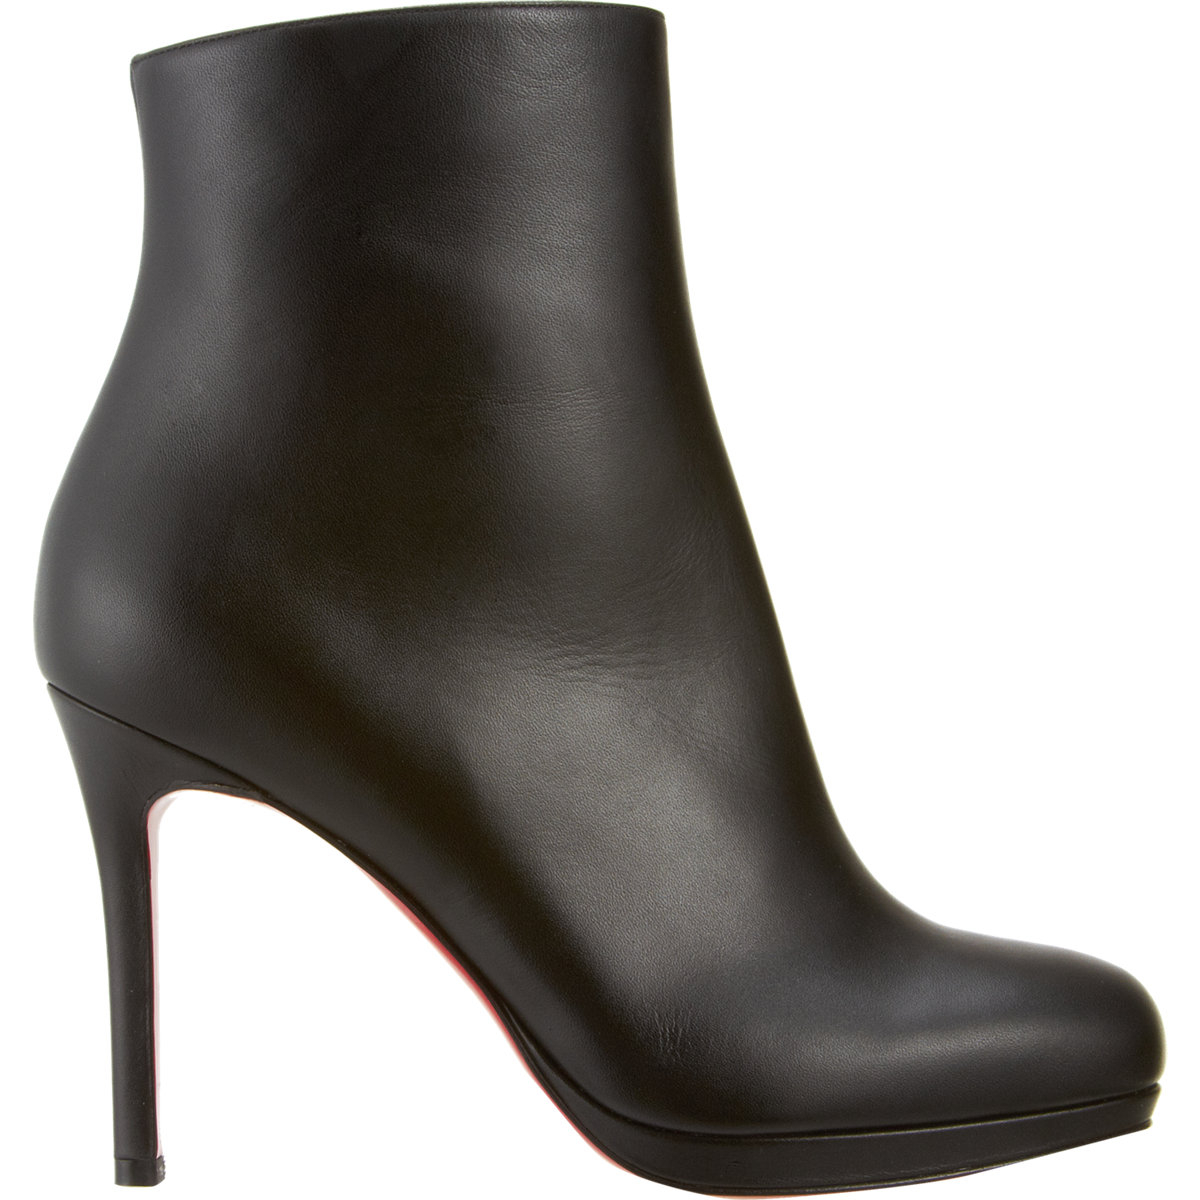 christian louboutin ankle boots Grey suede covered heels ...  